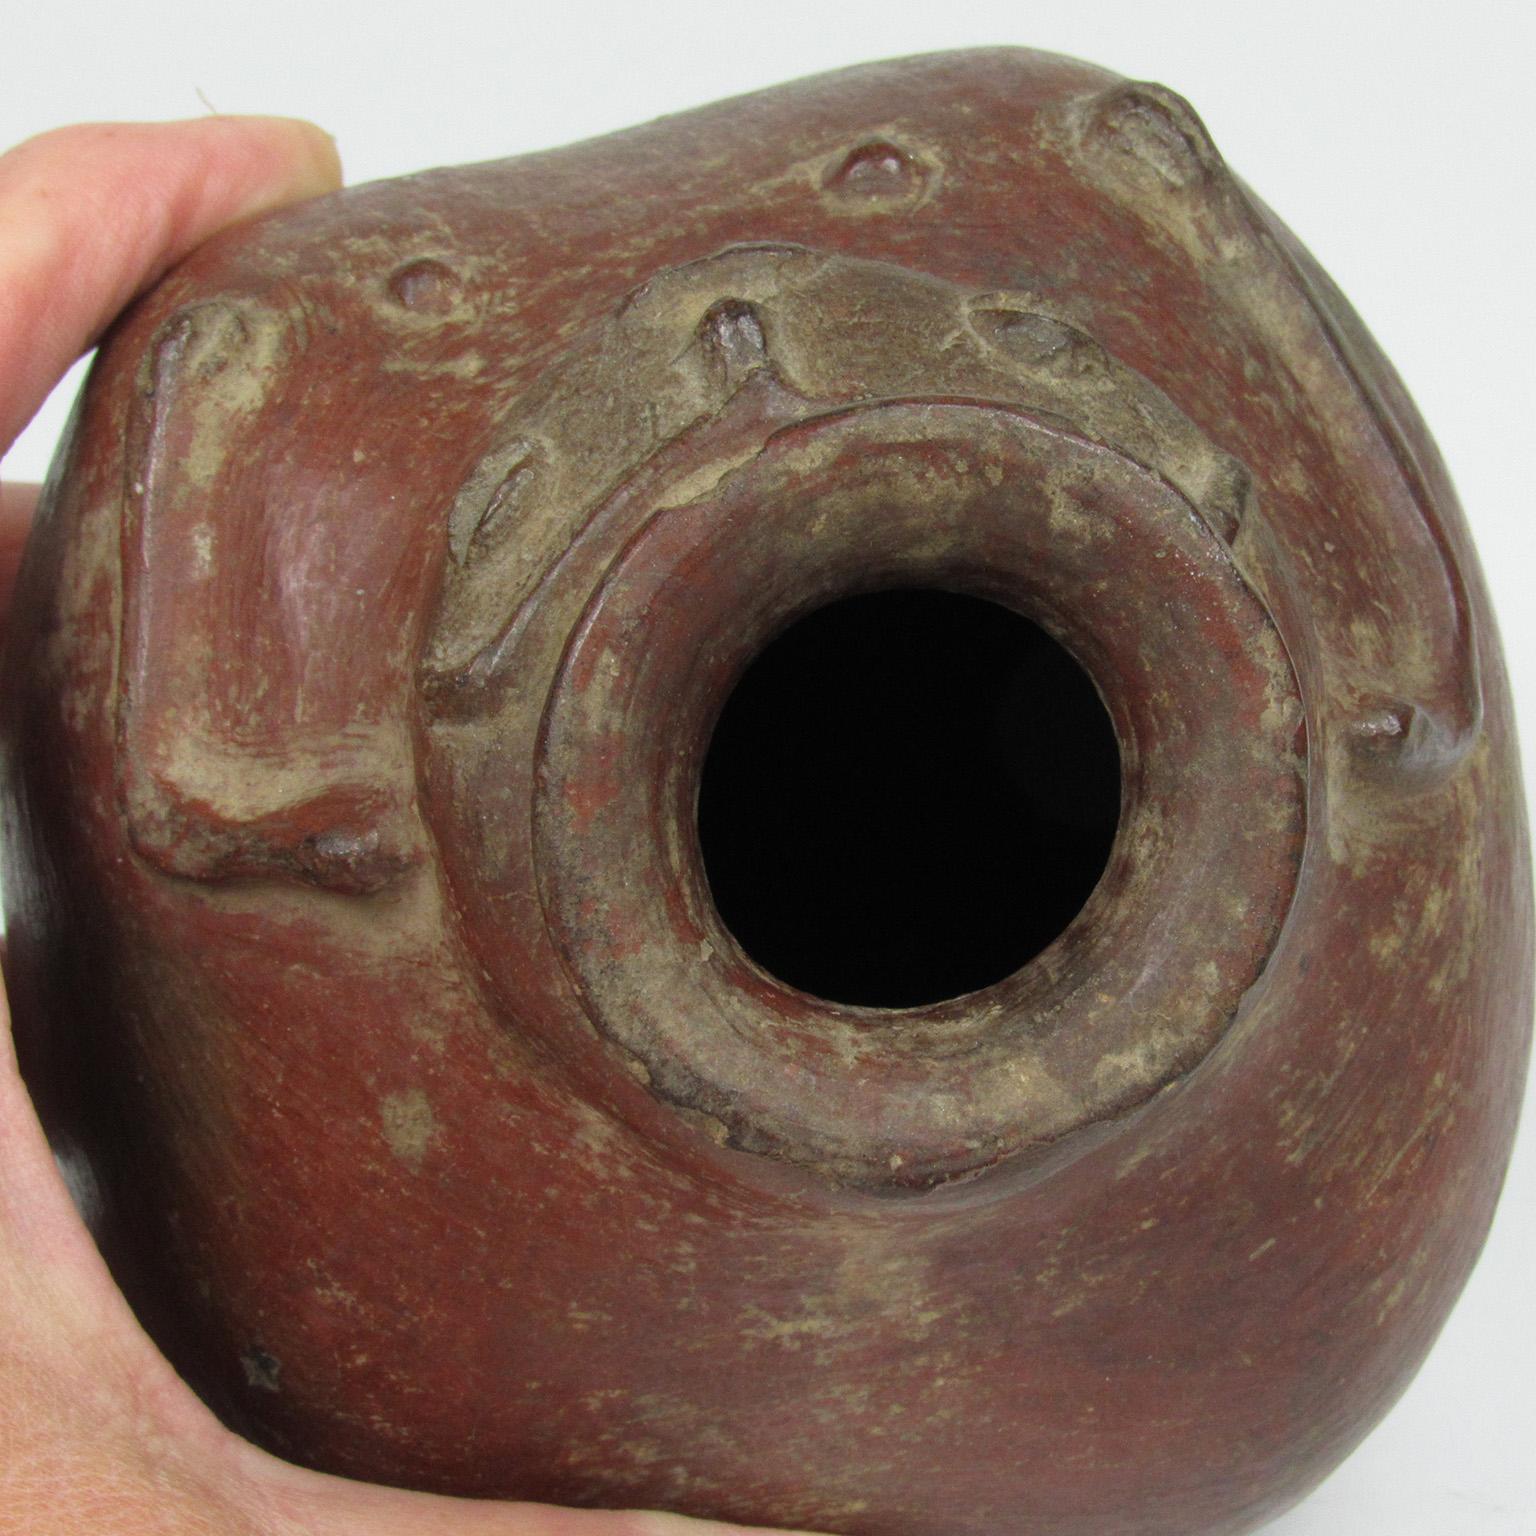 Pre-Columbian redware vessel, possibly Peruvian. An open vase in the form of a female with arms embracing the bulbous body. Kiln firing residue still visible. Measures: Height 4 1/2 in., diameter 4 in.